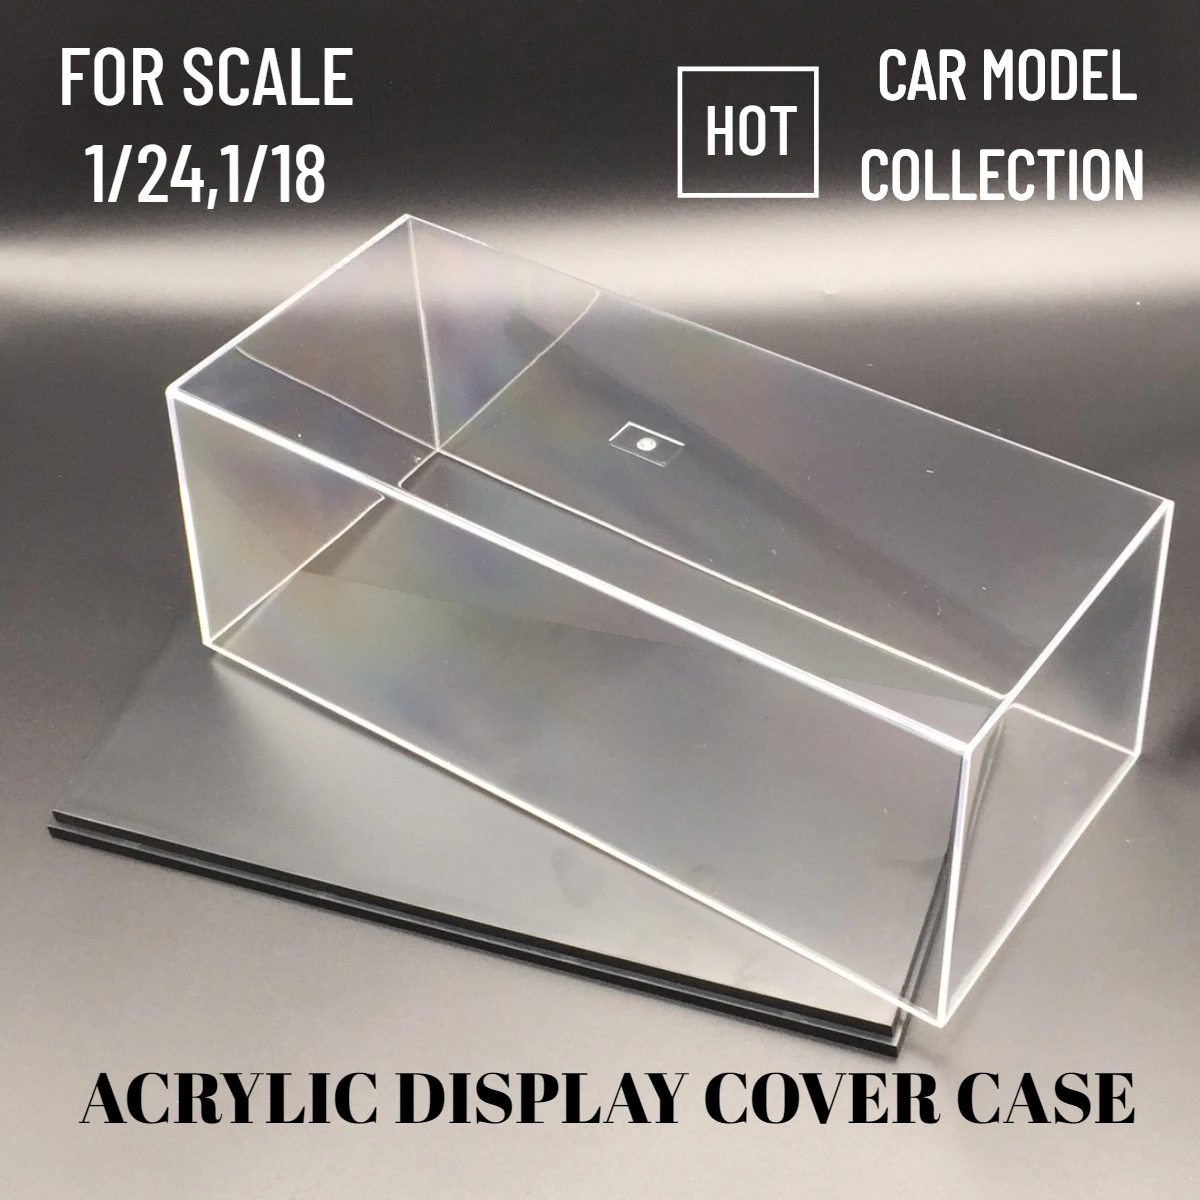 Scale 1:24 1:18 Car Model Display Case Transparent Acrylic Dust Proof Hard Cover PVC Box for Figure Collectible Miniature 18cm transparent stand acrylic display case show box dust proof base for 1 32 car models